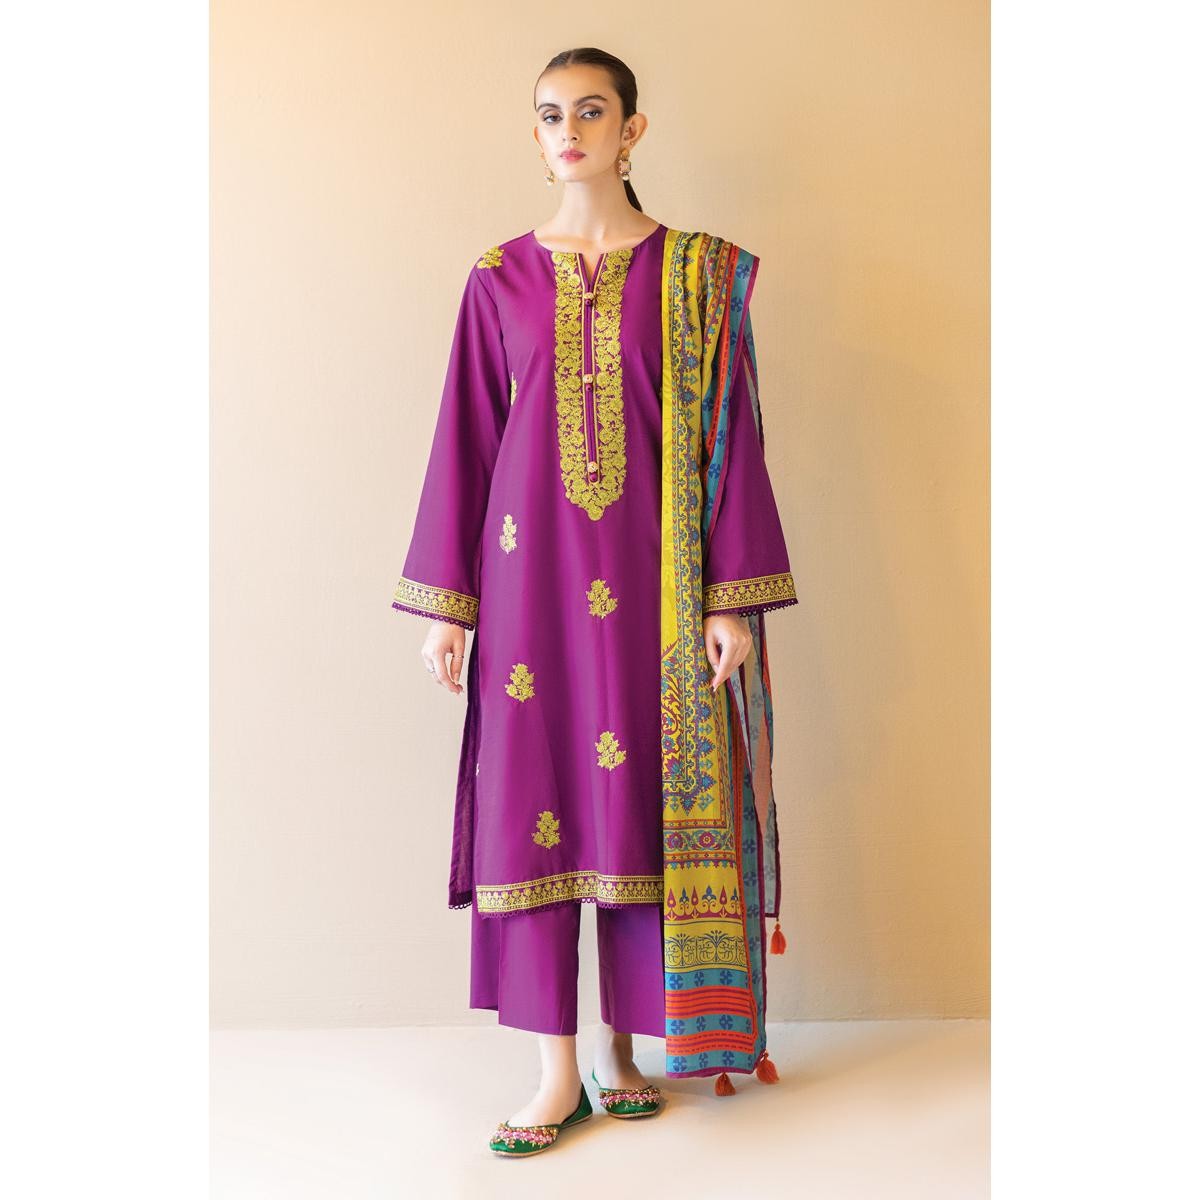 /2023/01/orient-unstitched-3-piece-embroidered-cambric-shirt-cambric-pant-and-lawn-dupatta-376756746_pk-1862851675-image1.jpeg